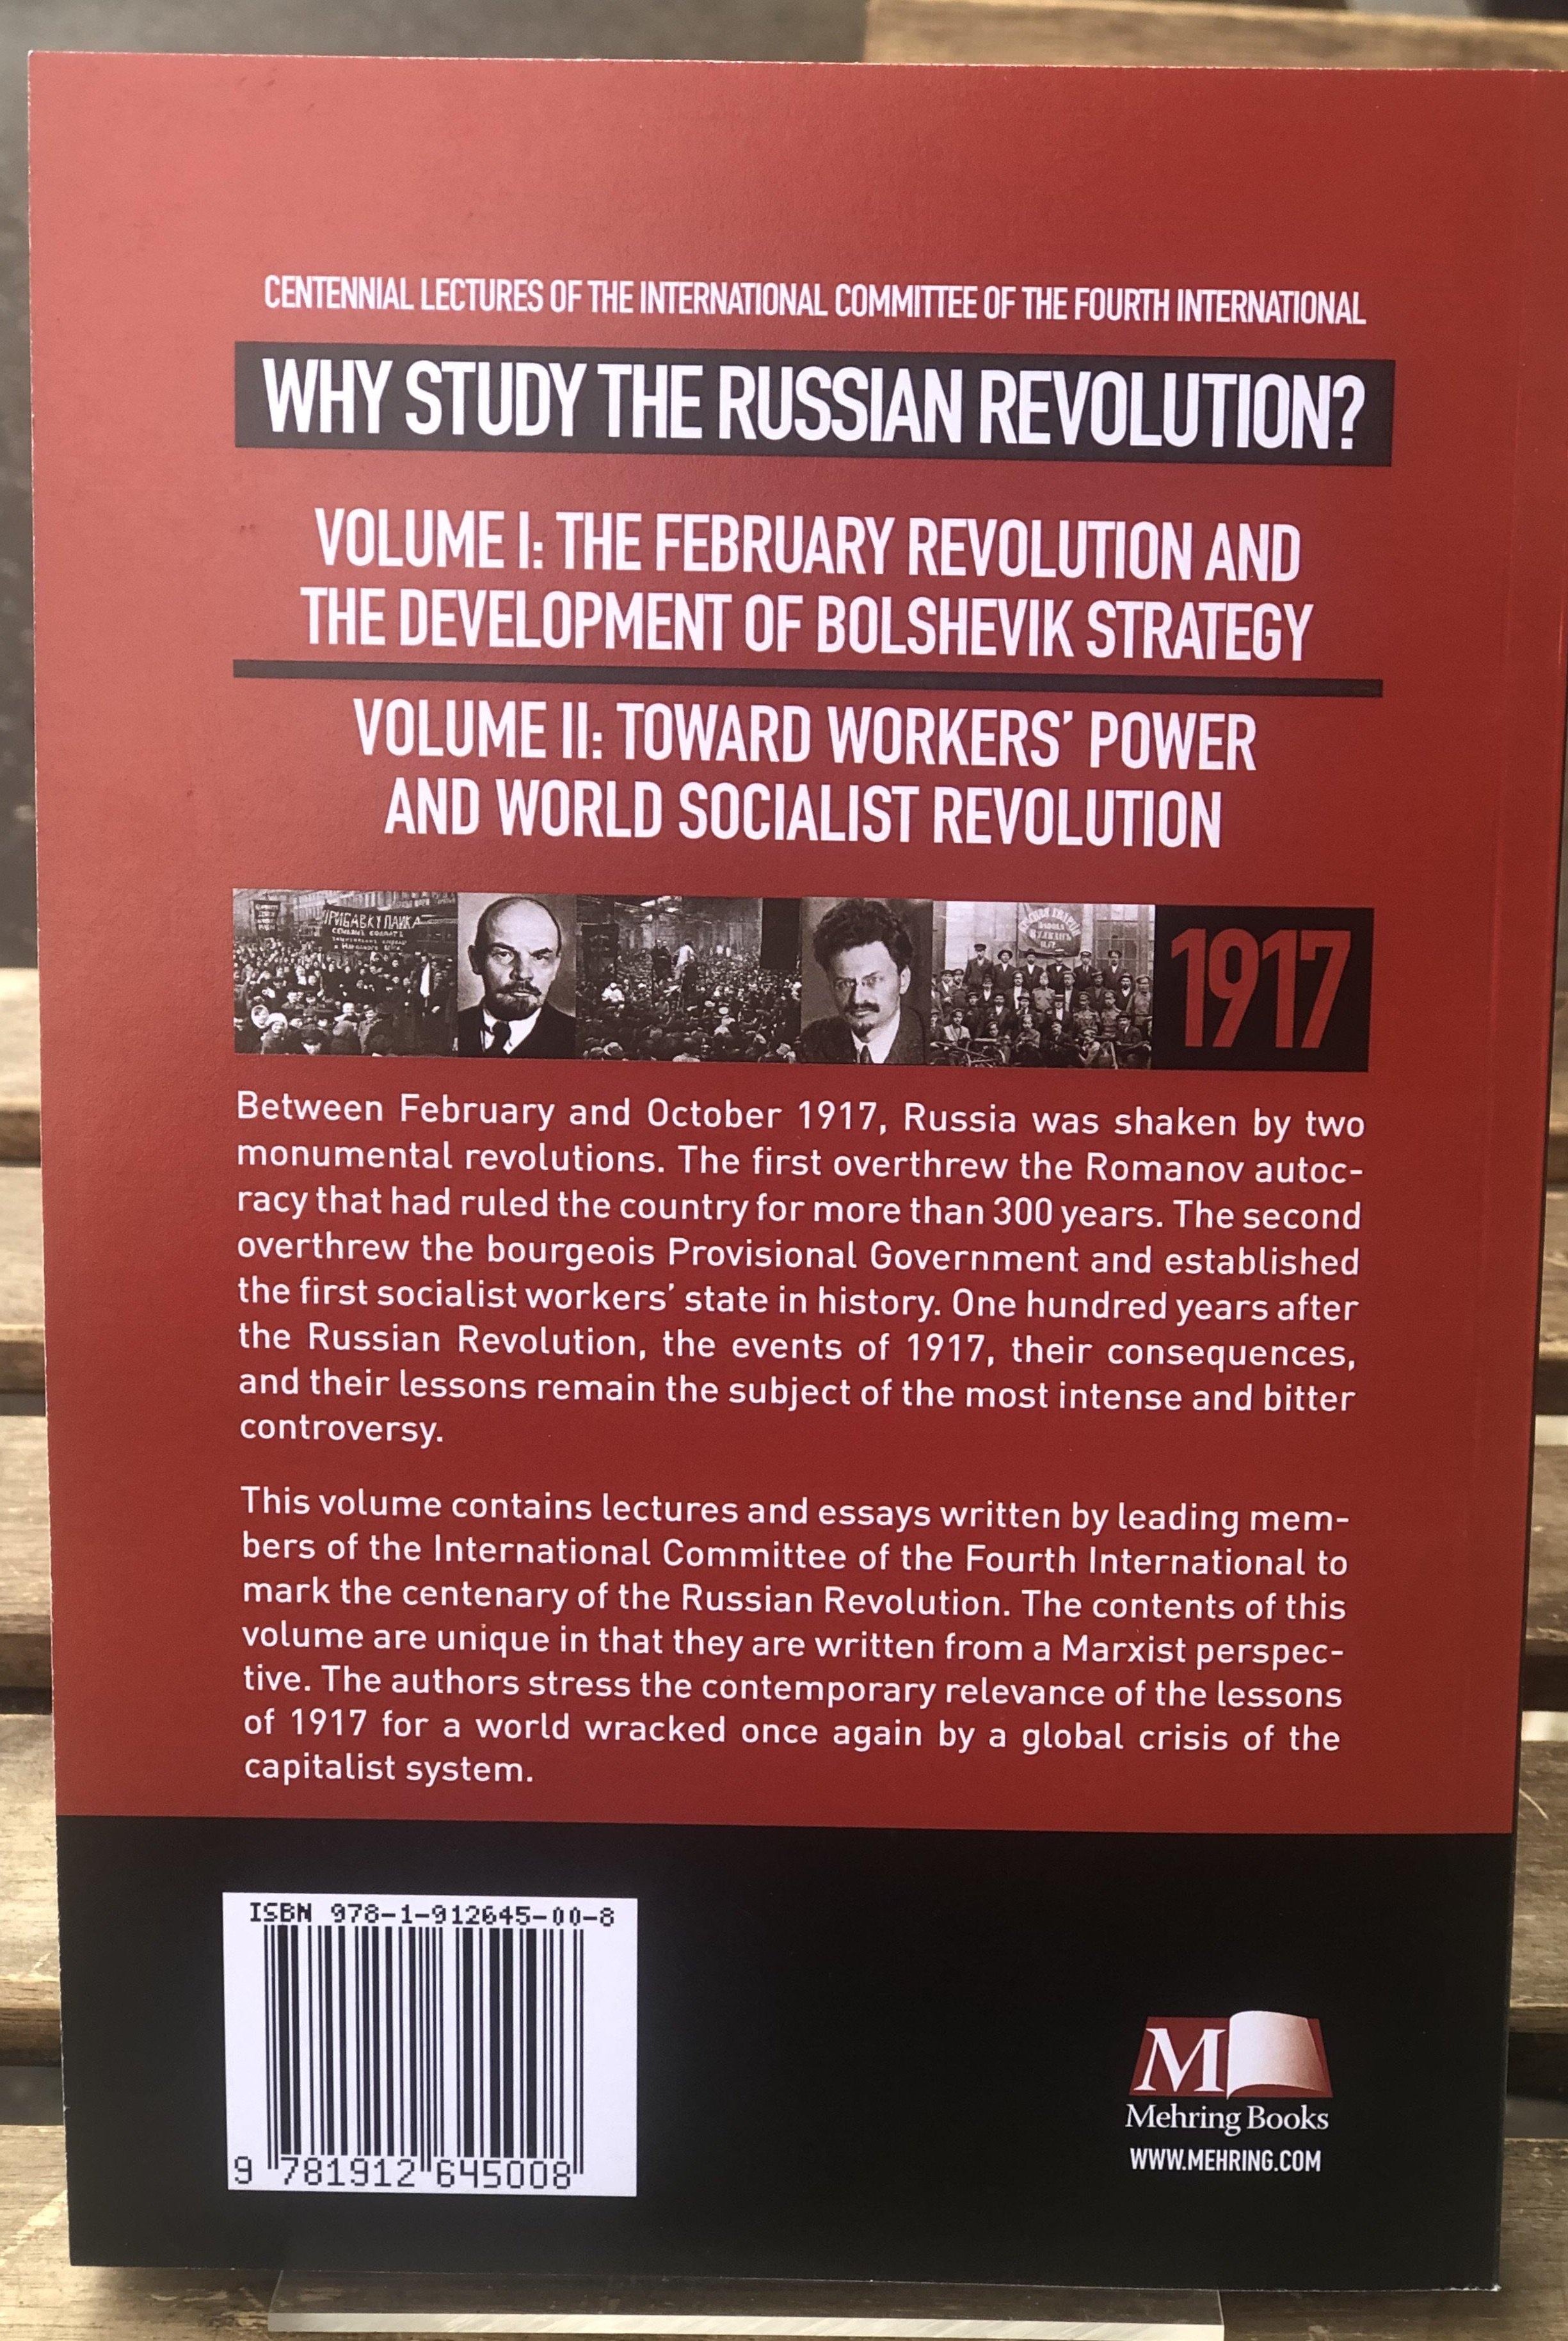 Why Study The Russian Revolution?: Centennial Lectures of the International Committee of the Fourth International - Belfast Books